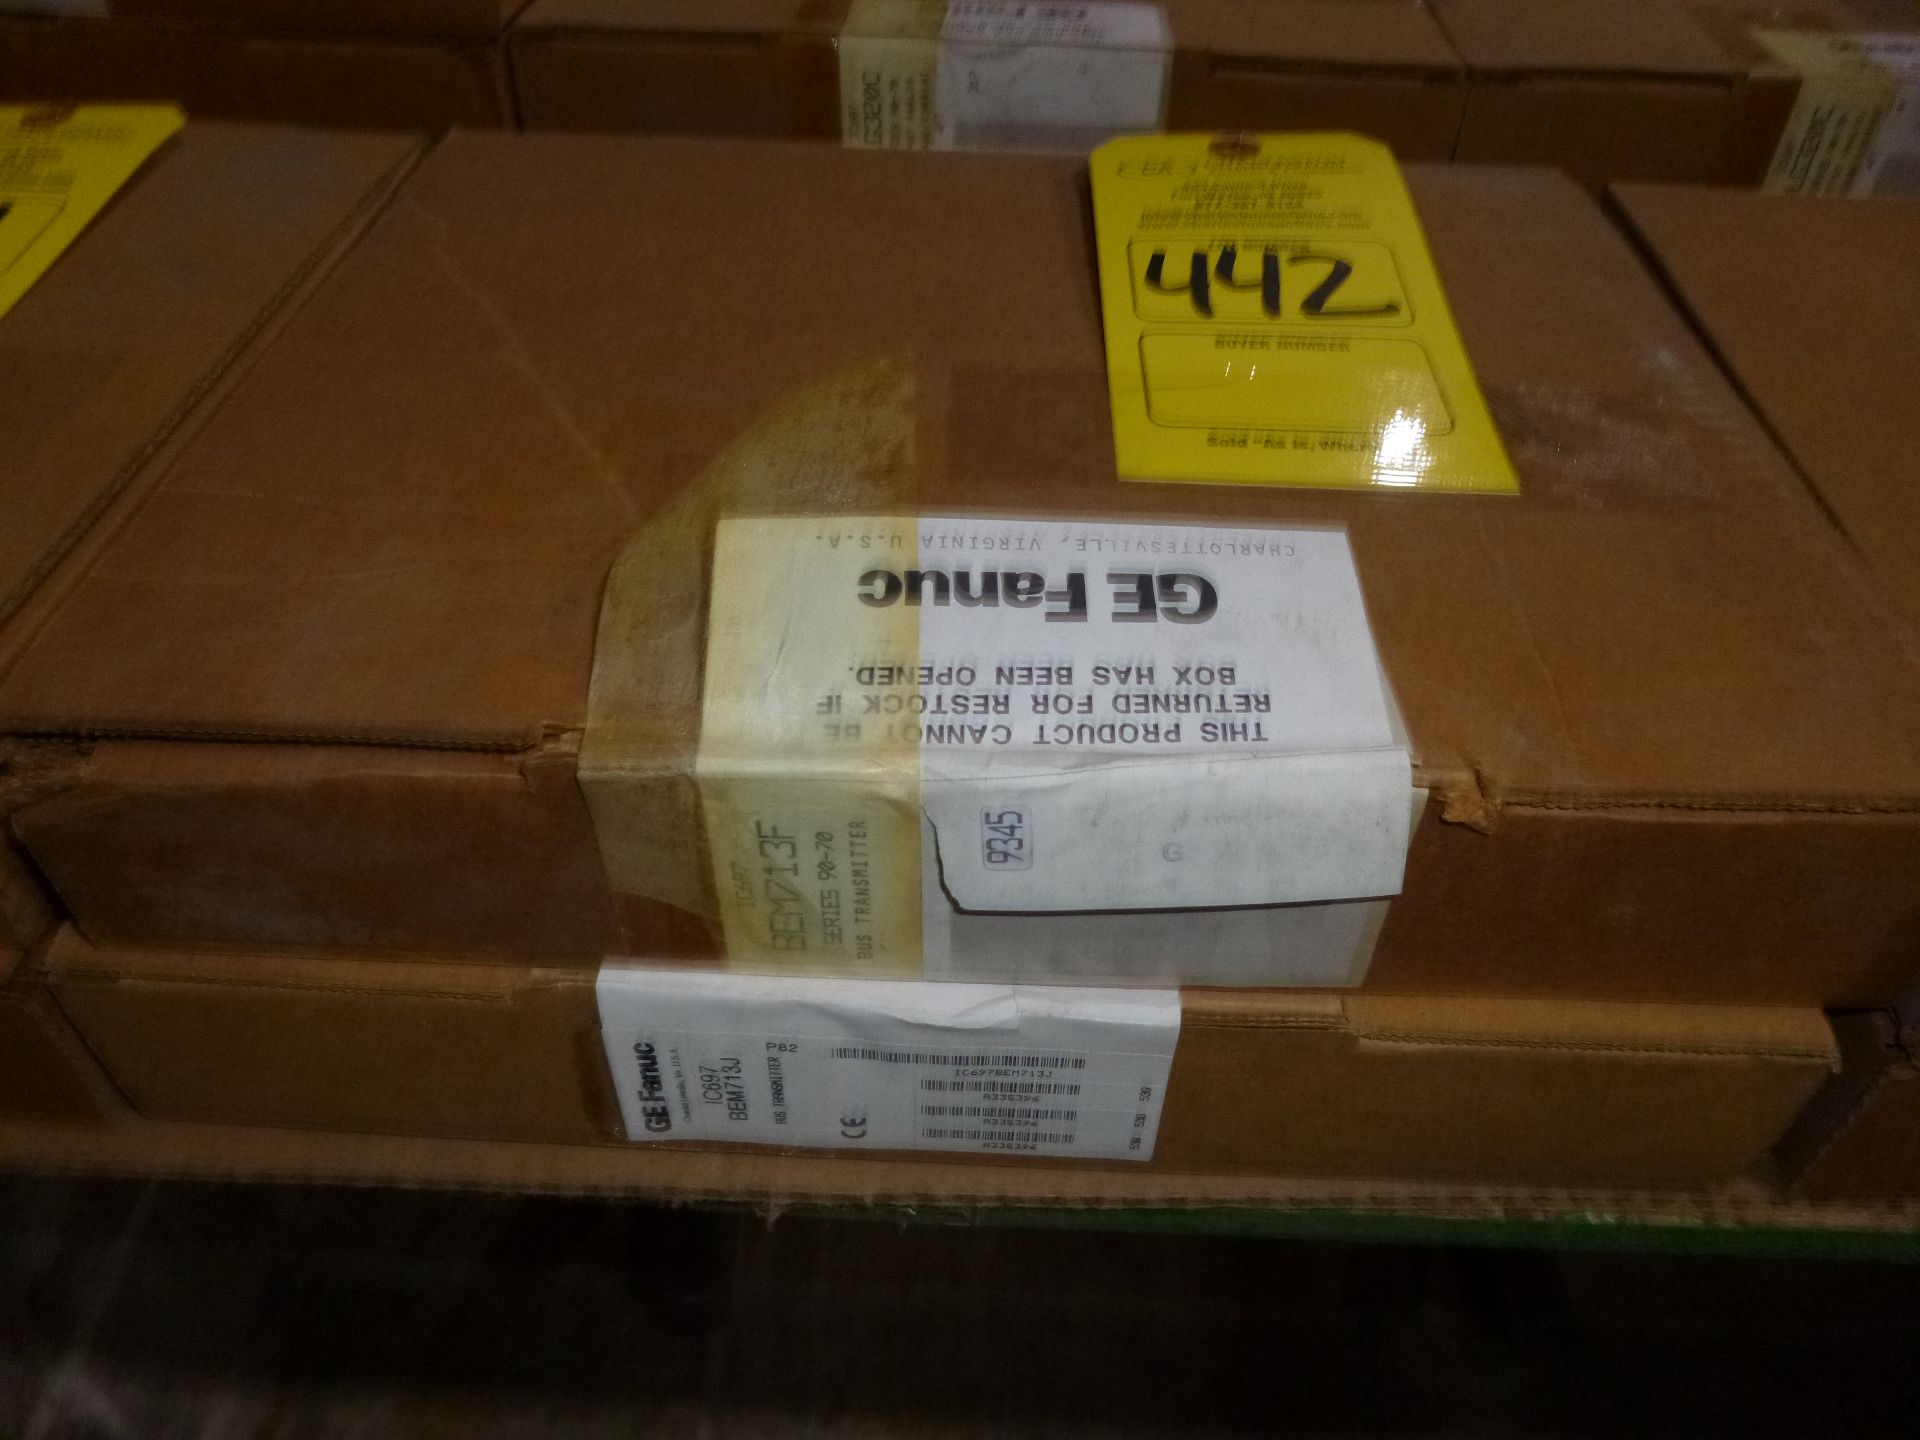 Qty 2 GE Fanuc IC697BEM713J, as always with Brolyn LLC auctions, all lots can be picked up from